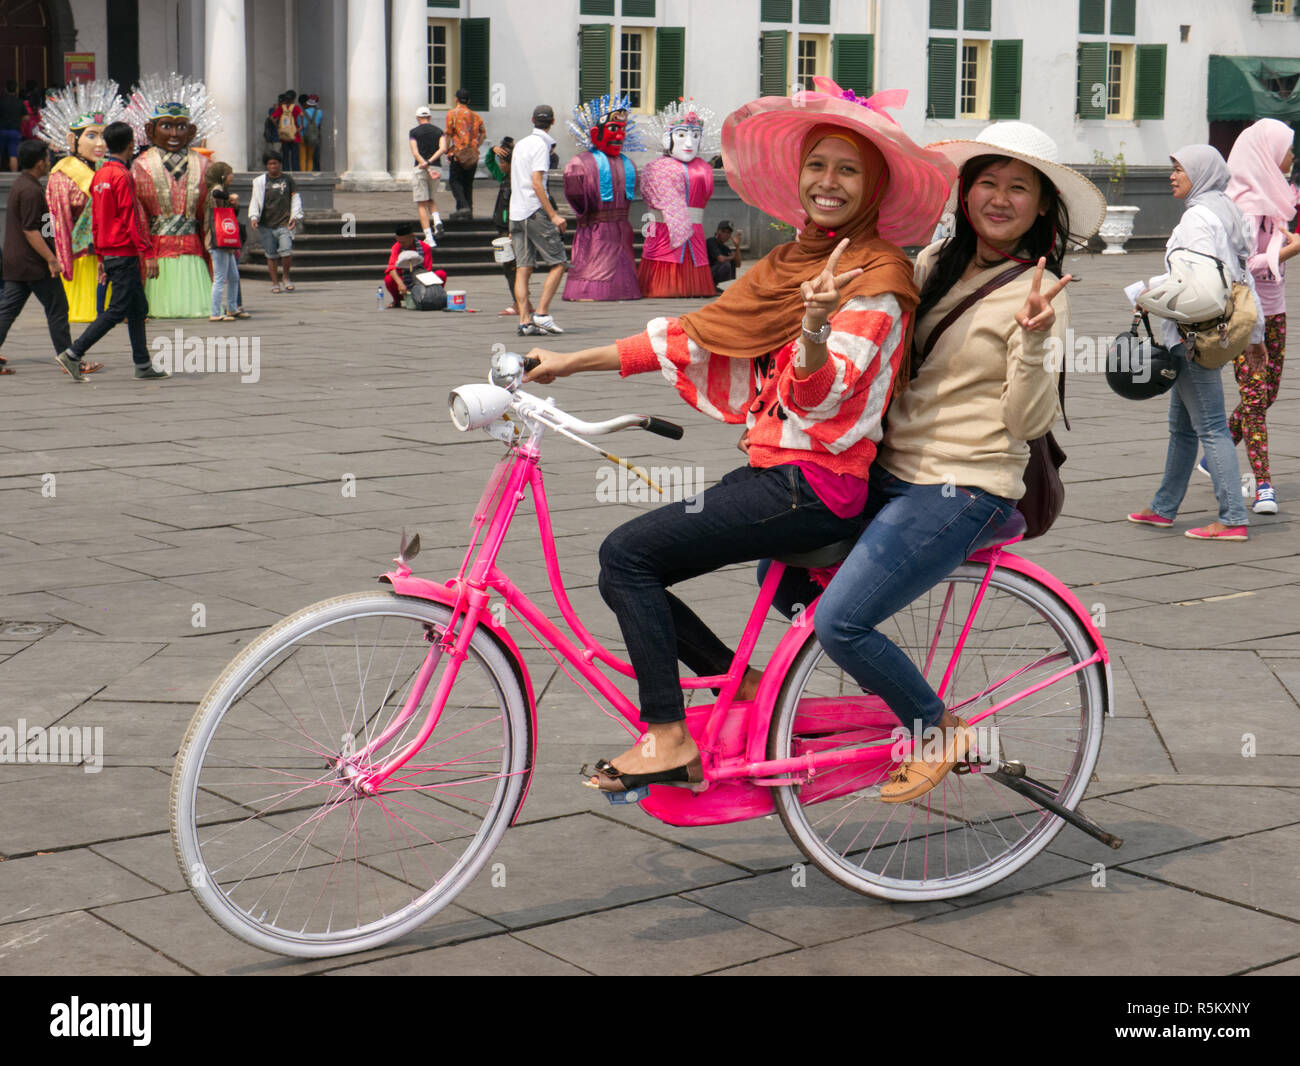 Horizontal photo of two smiling, happy, young Indonesian girls riding a pink bike with white tires wearing big hats in Jakarta Old Town Square. Stock Photo